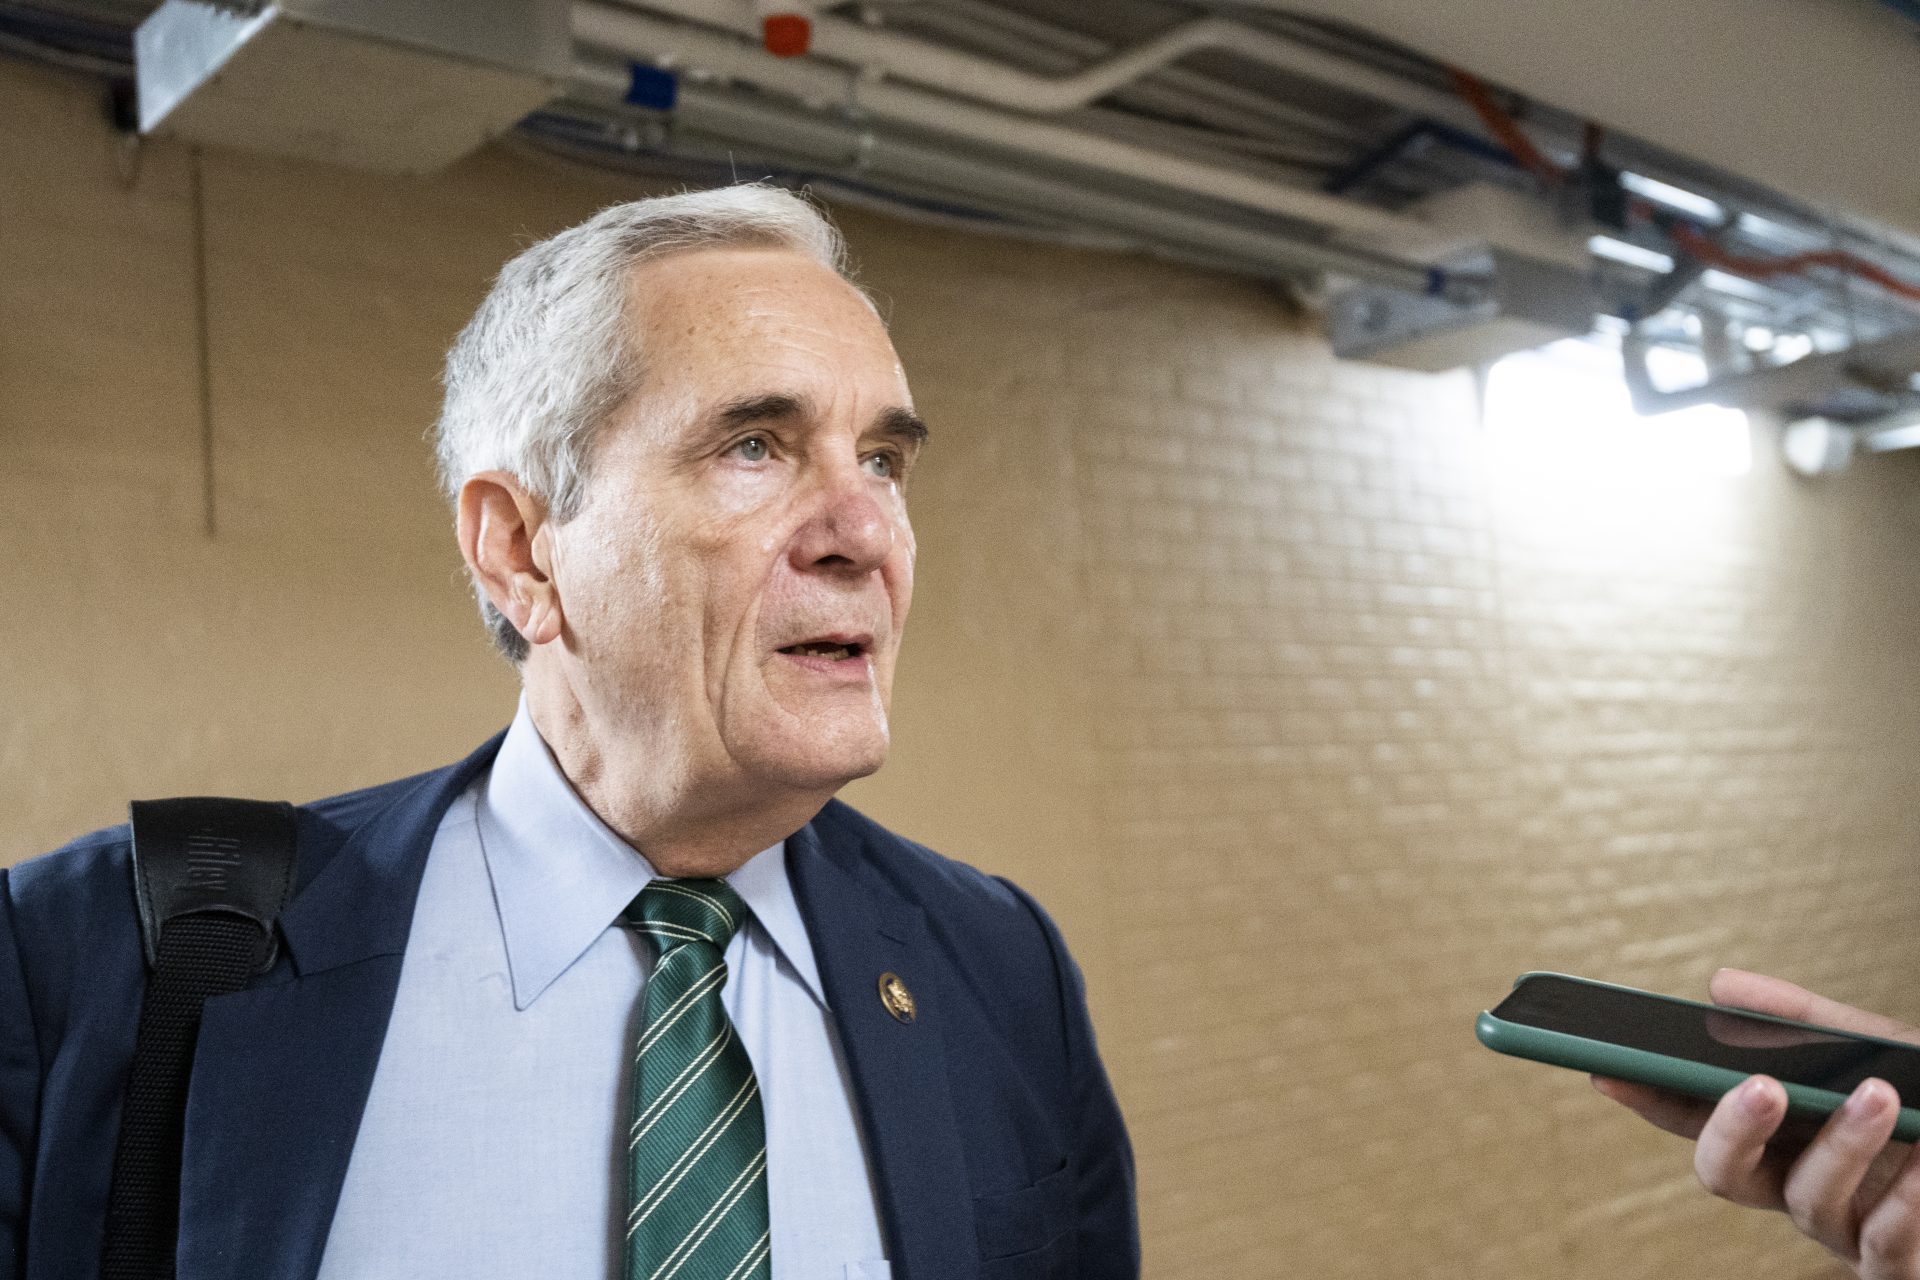 Lloyd Doggett was the first Democrat to say what others were thinking